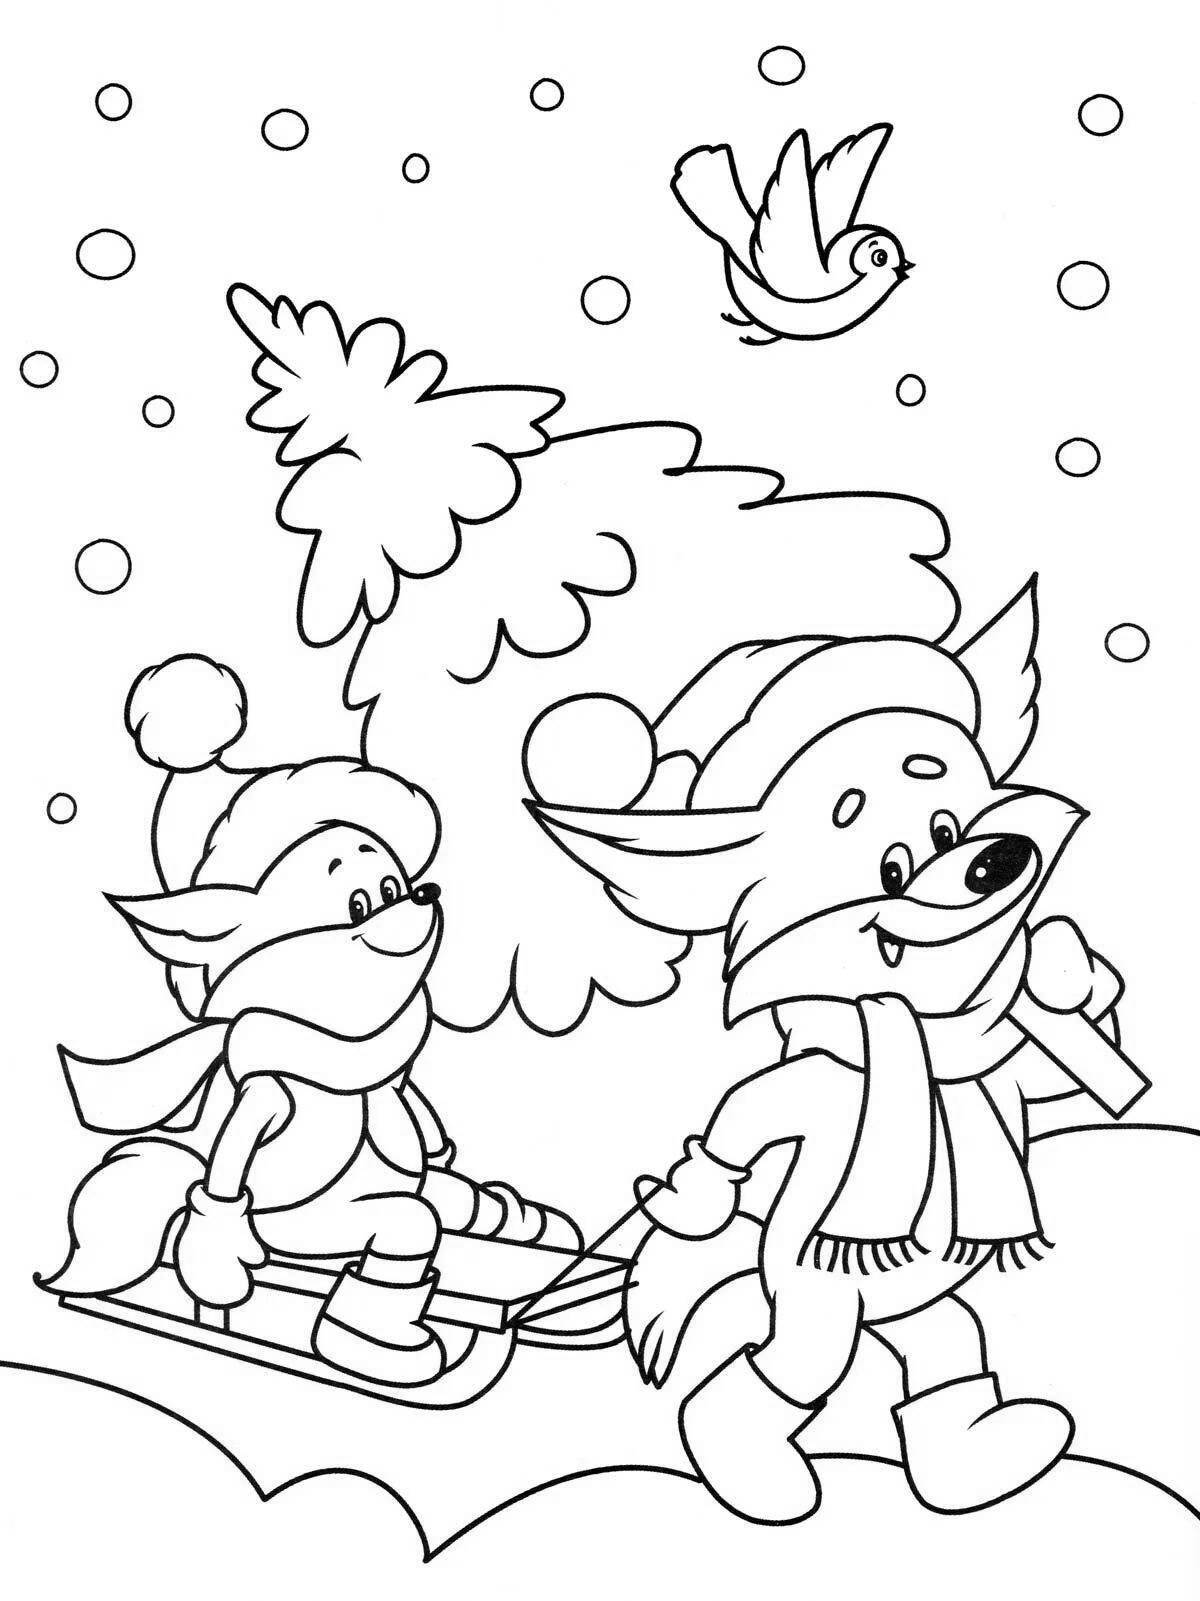 Delightful coloring book for children 3-4 years old winter new year